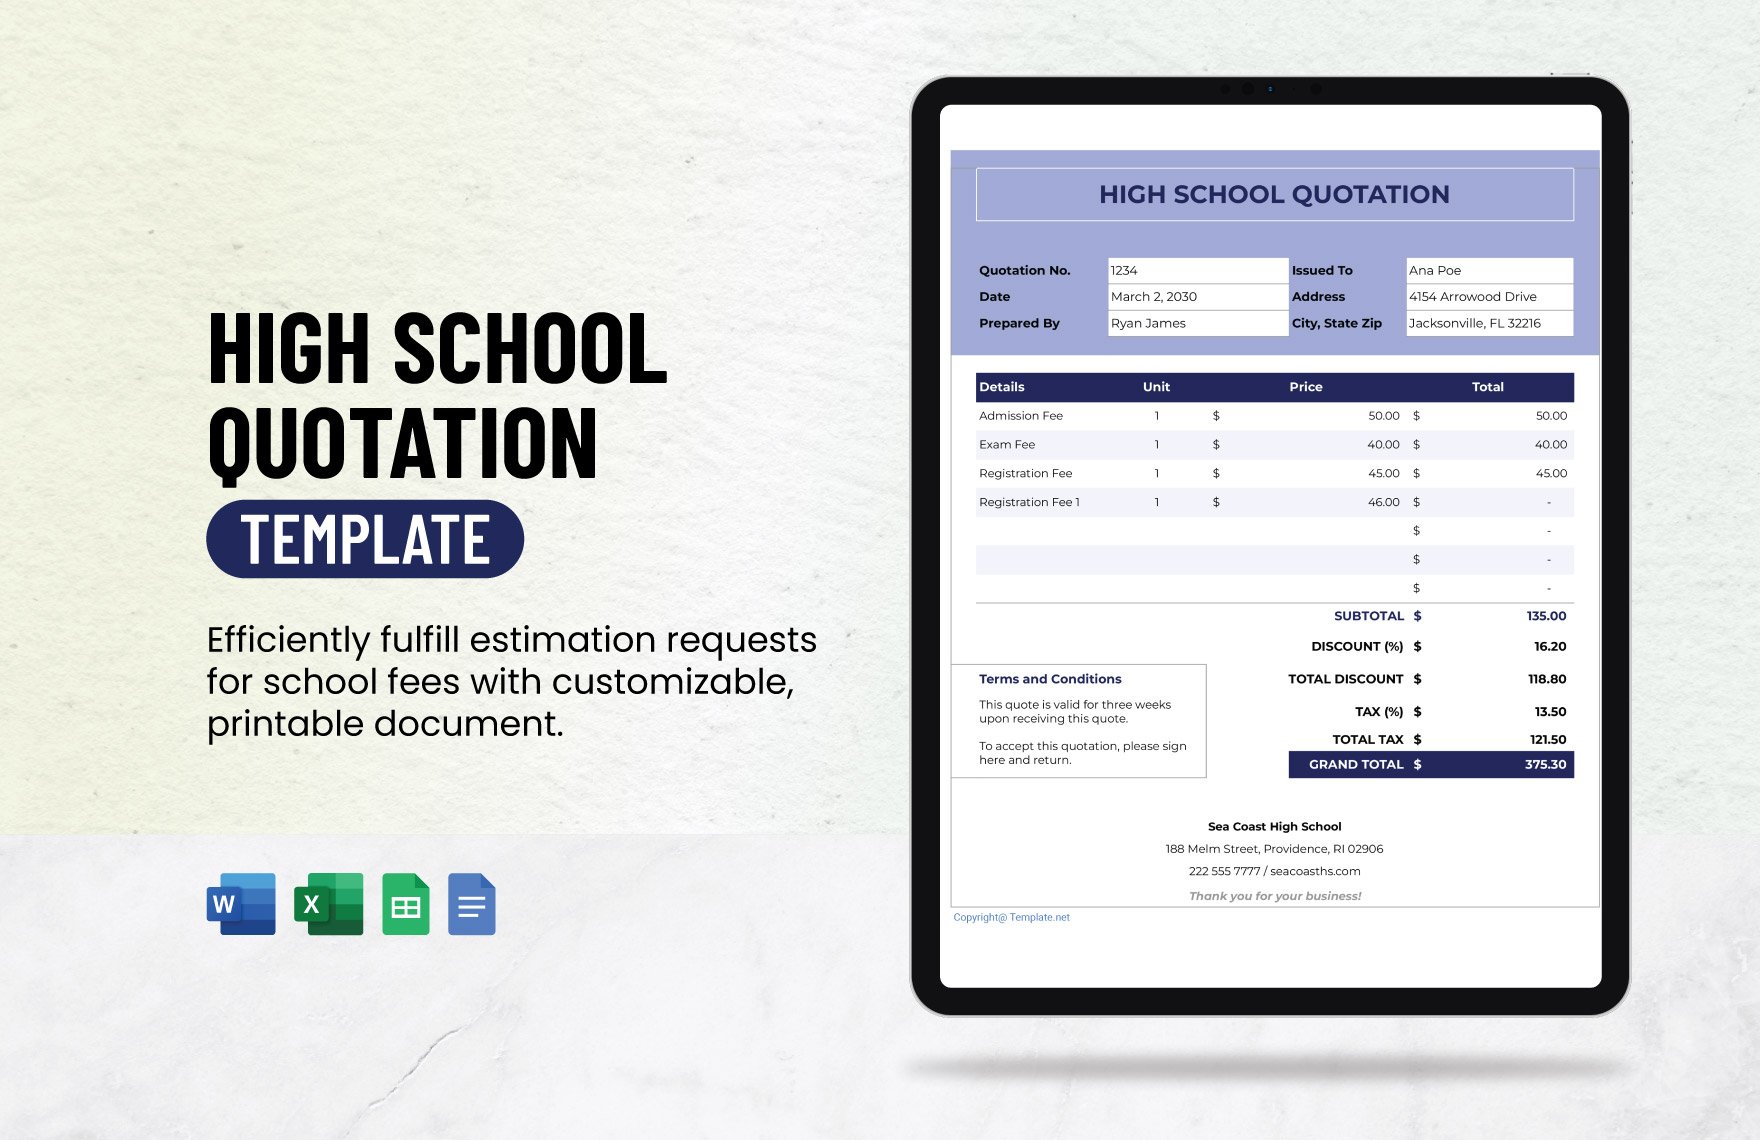 High School Quotation Template in Word, Google Docs, Excel, Google Sheets